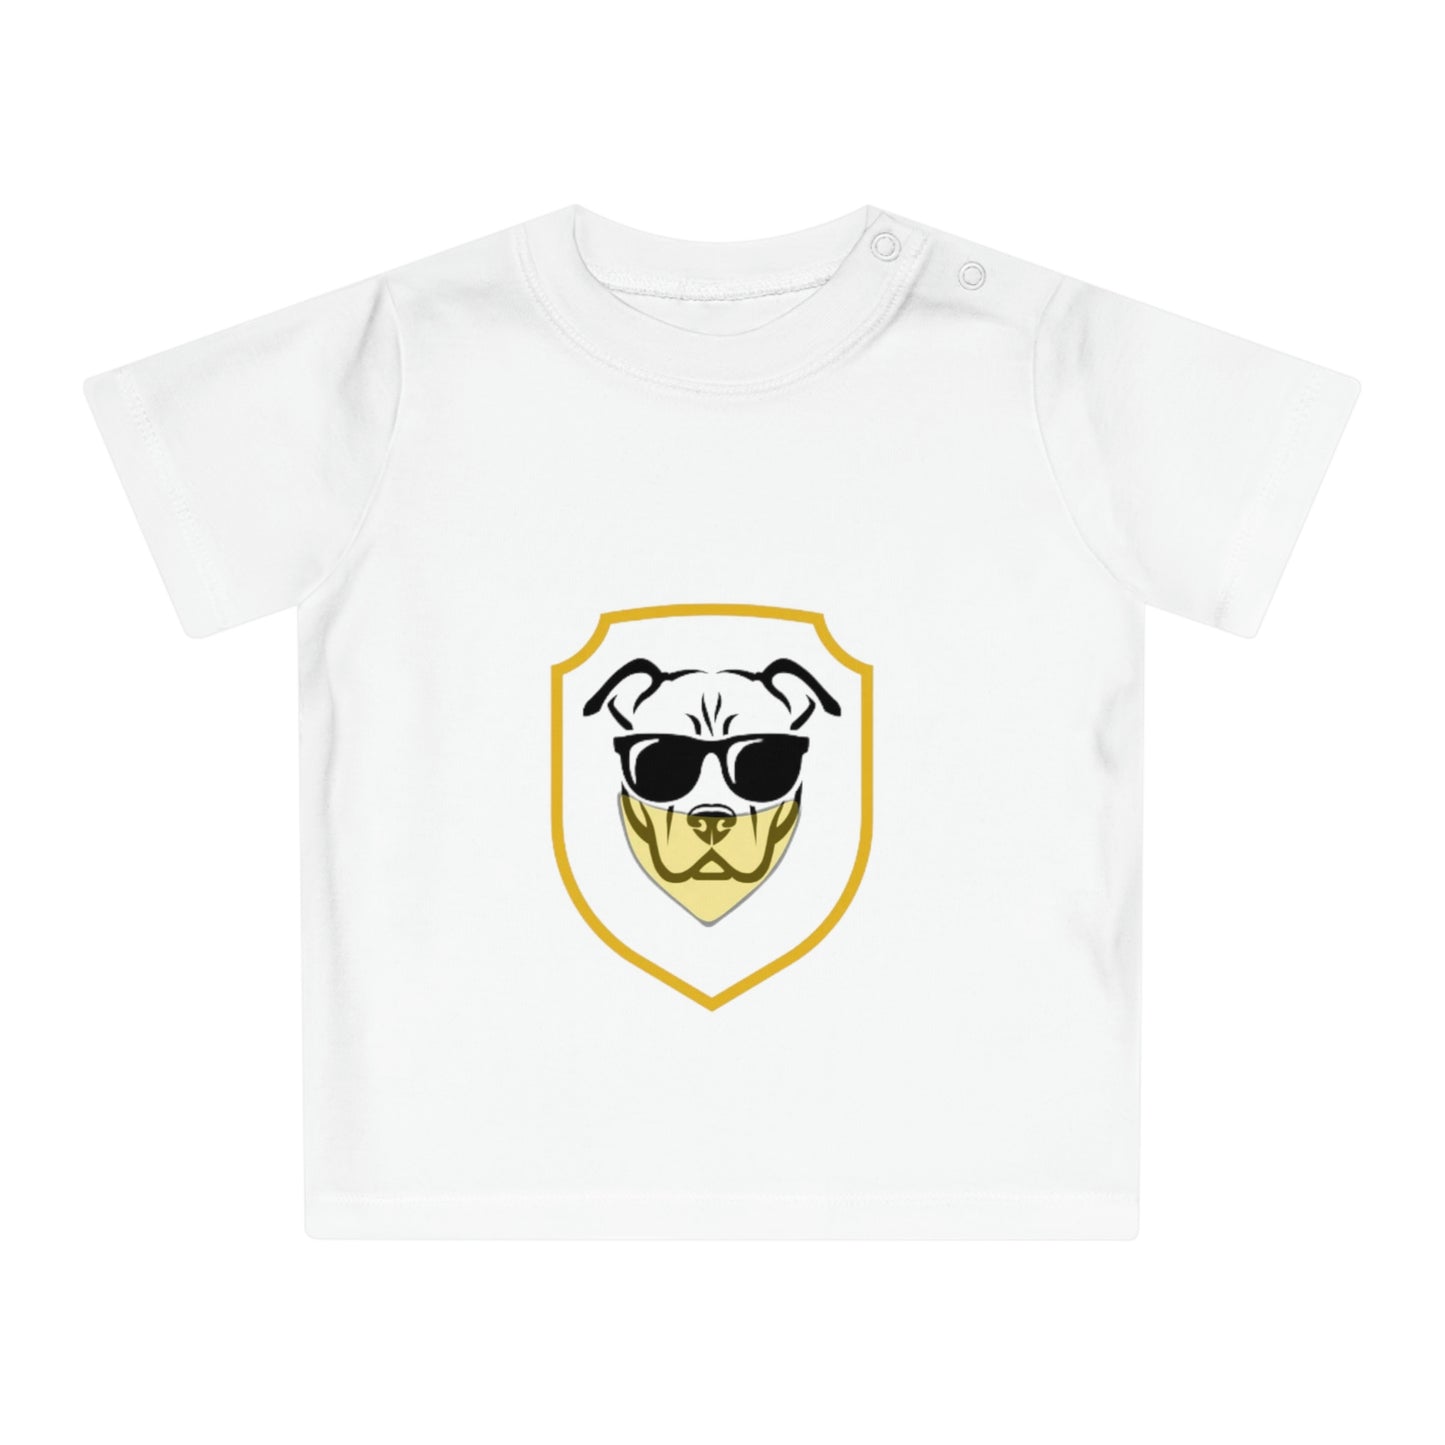 Adorable Pitbull Baby T-Shirts - Comfortable and Stylish for Your Little One